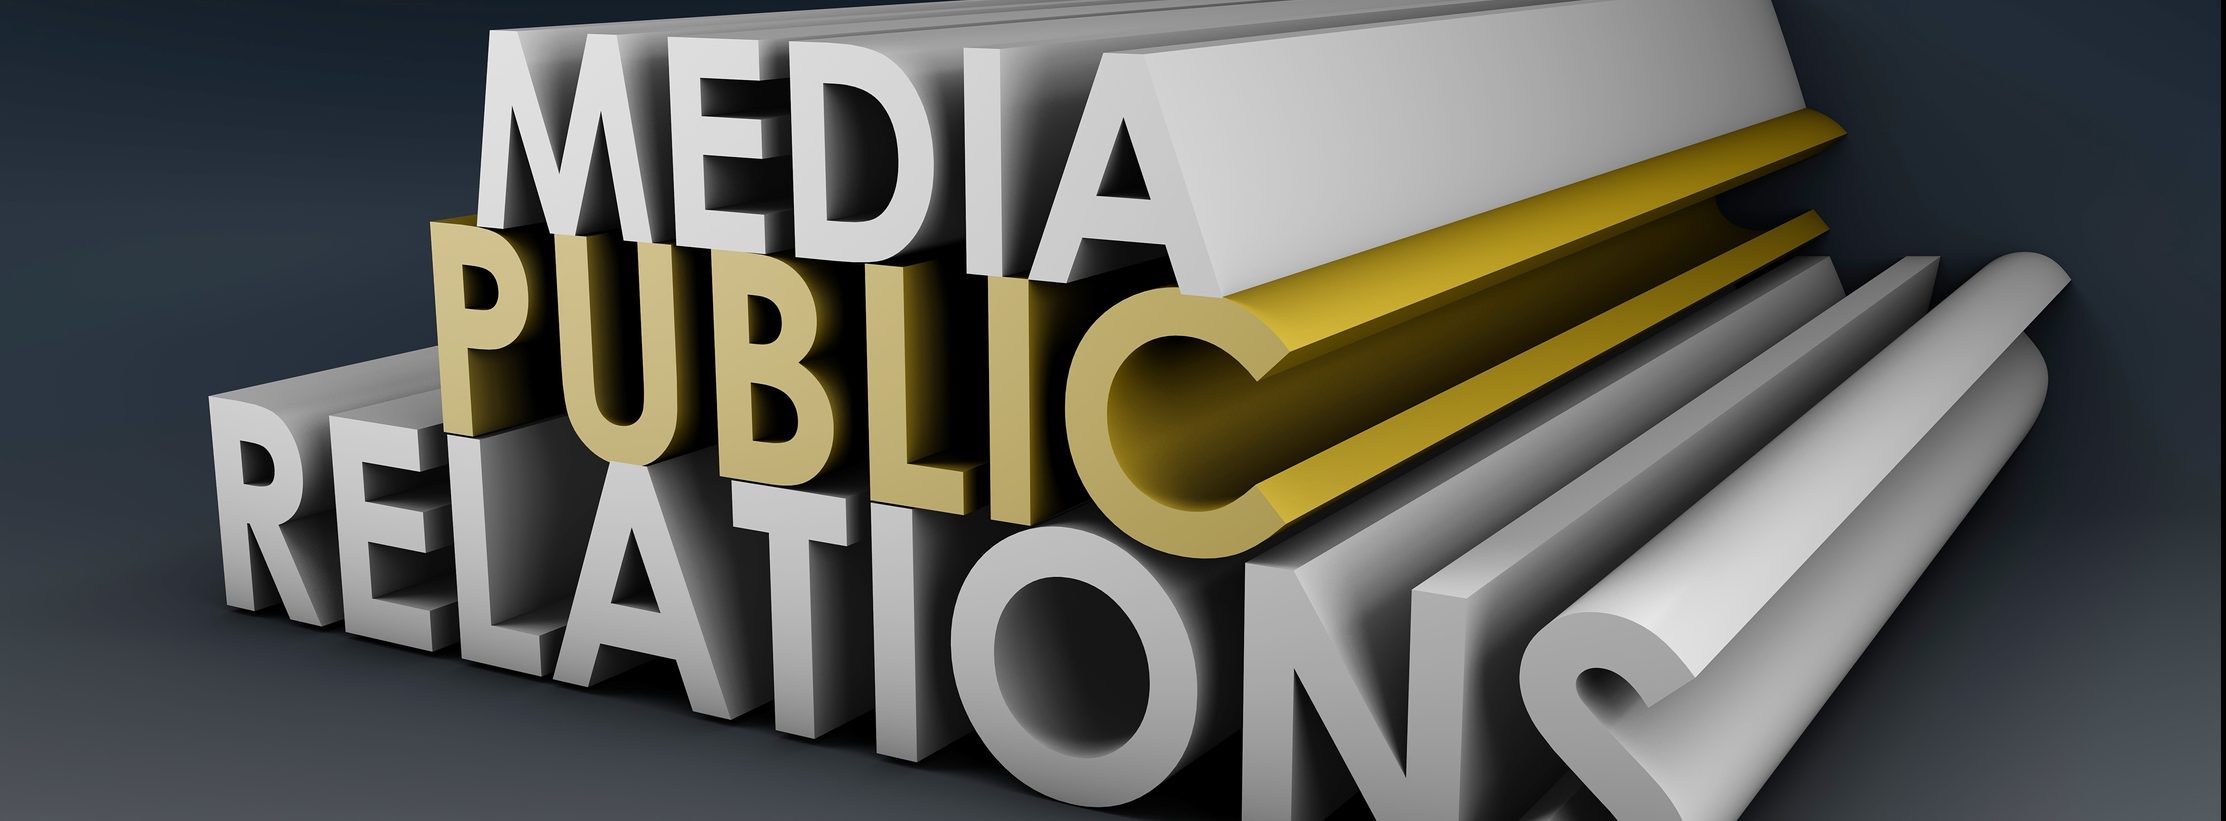 Media and public relations training